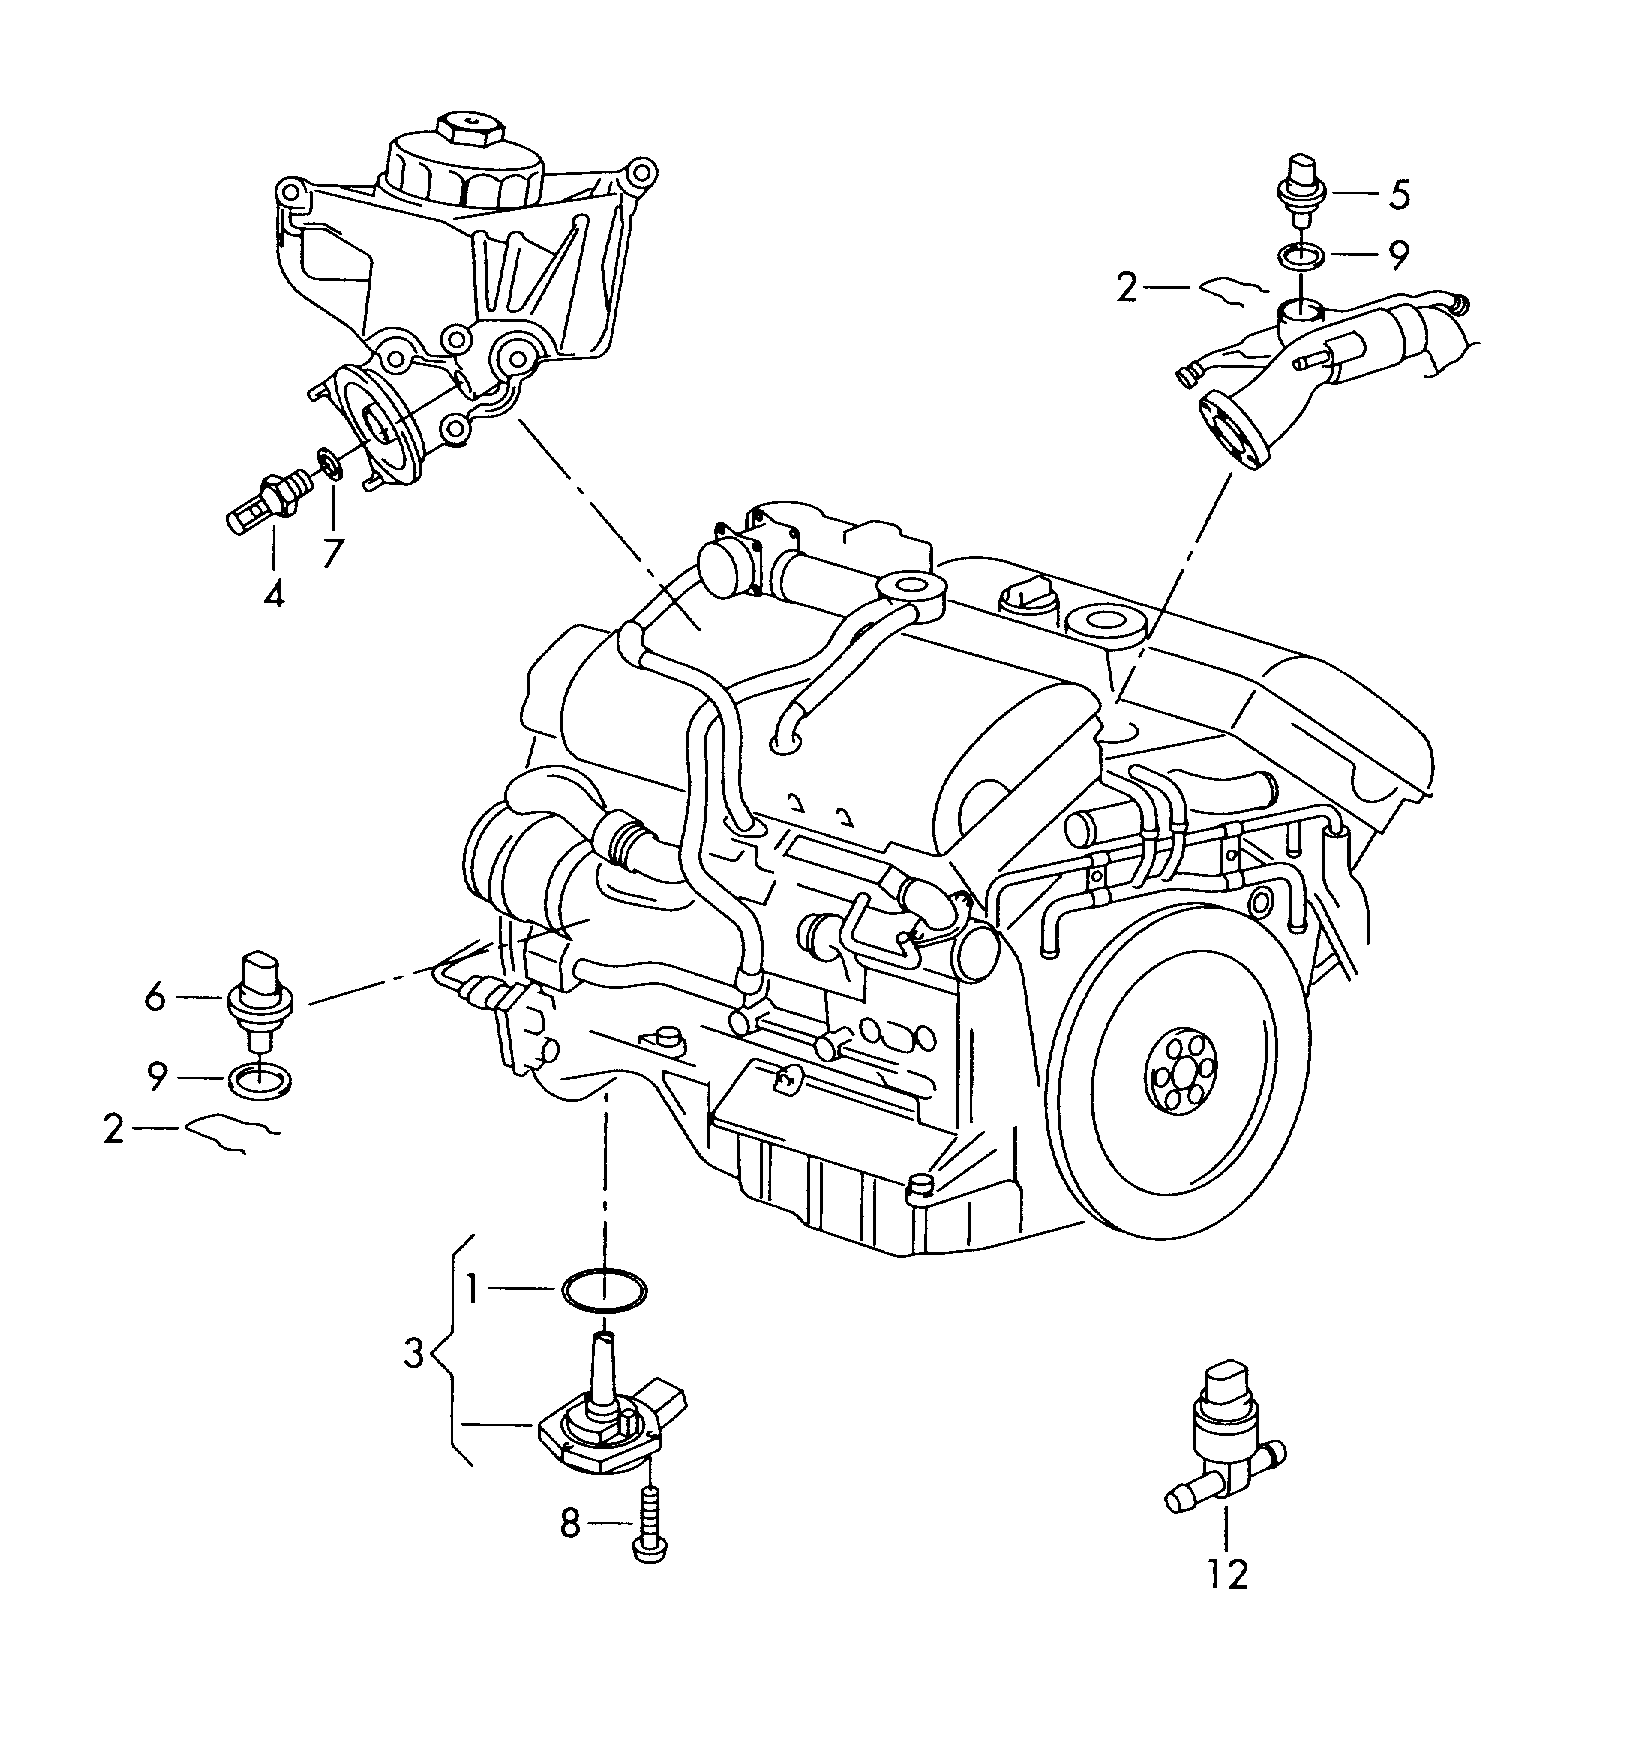 switches and senders on engine
and gearbox - Audi A6/S6/Avant quattro(A6Q)  